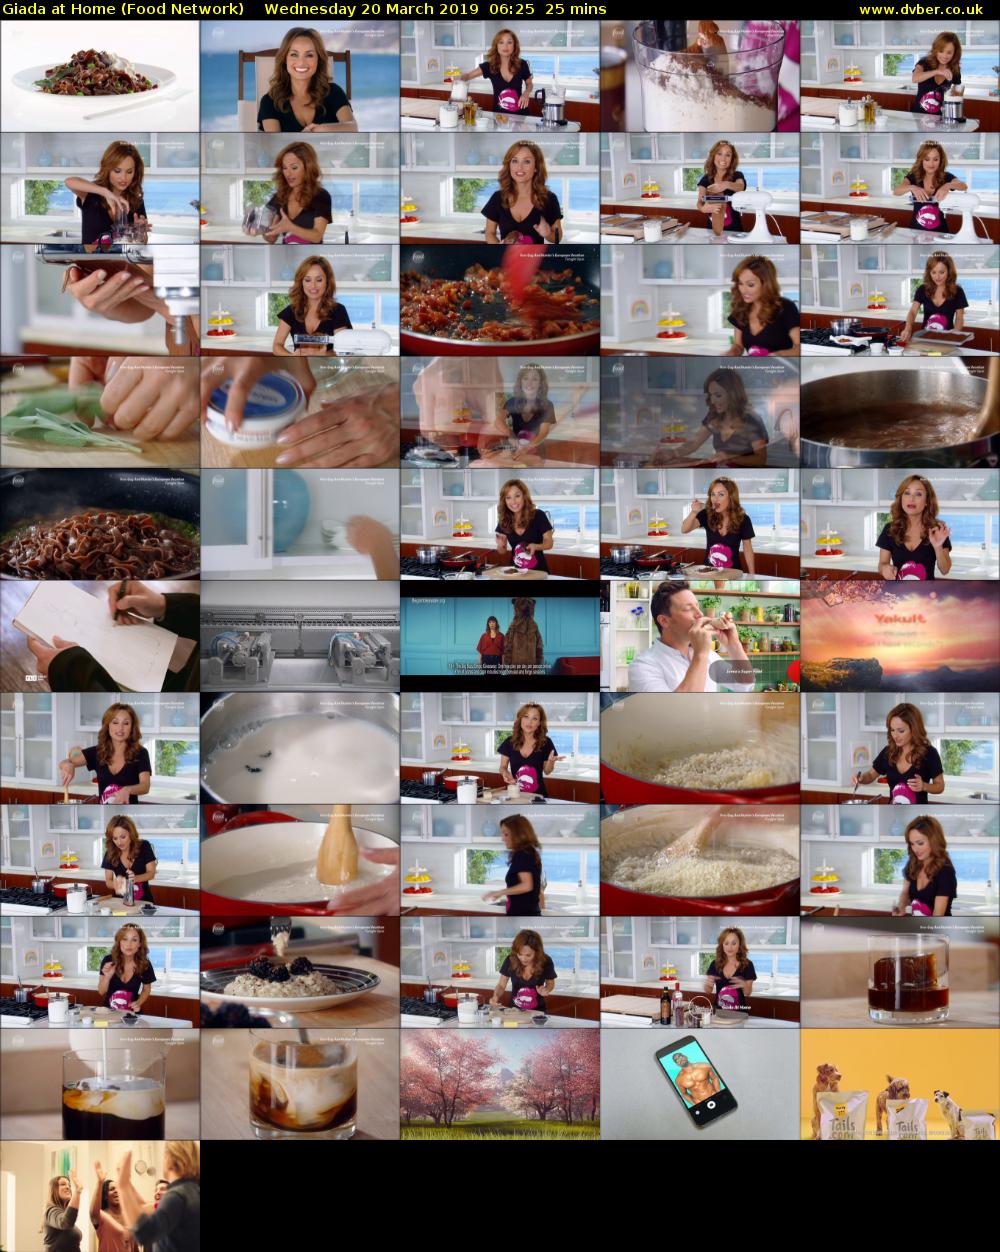 Giada at Home (Food Network) Wednesday 20 March 2019 06:25 - 06:50